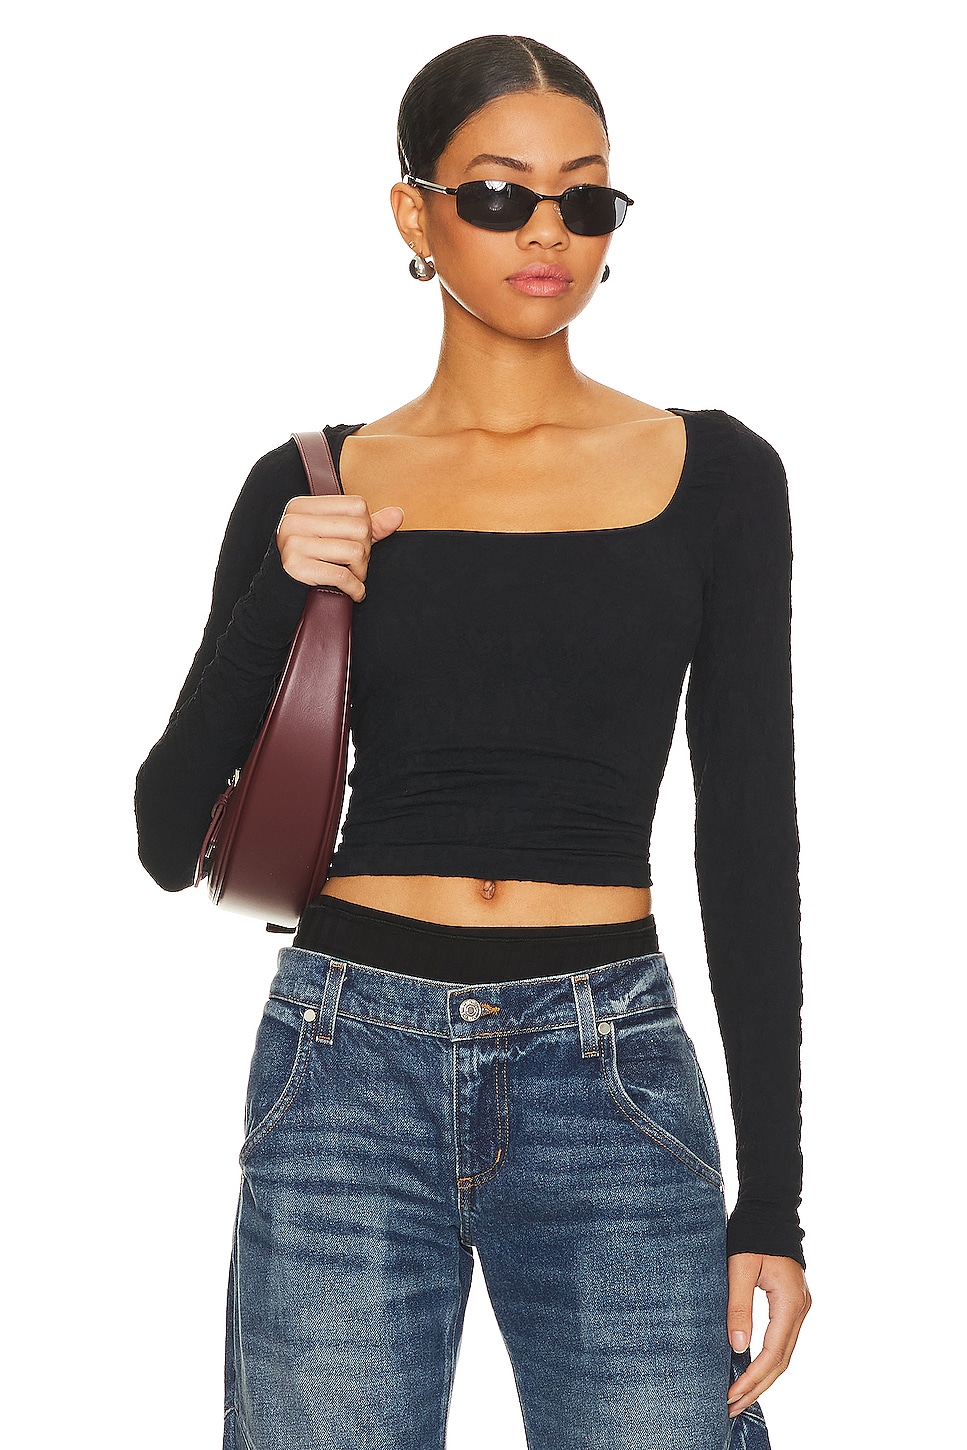 FREE PEOPLE Seamless Have It All Womens Long Sleeve Top - WASHED